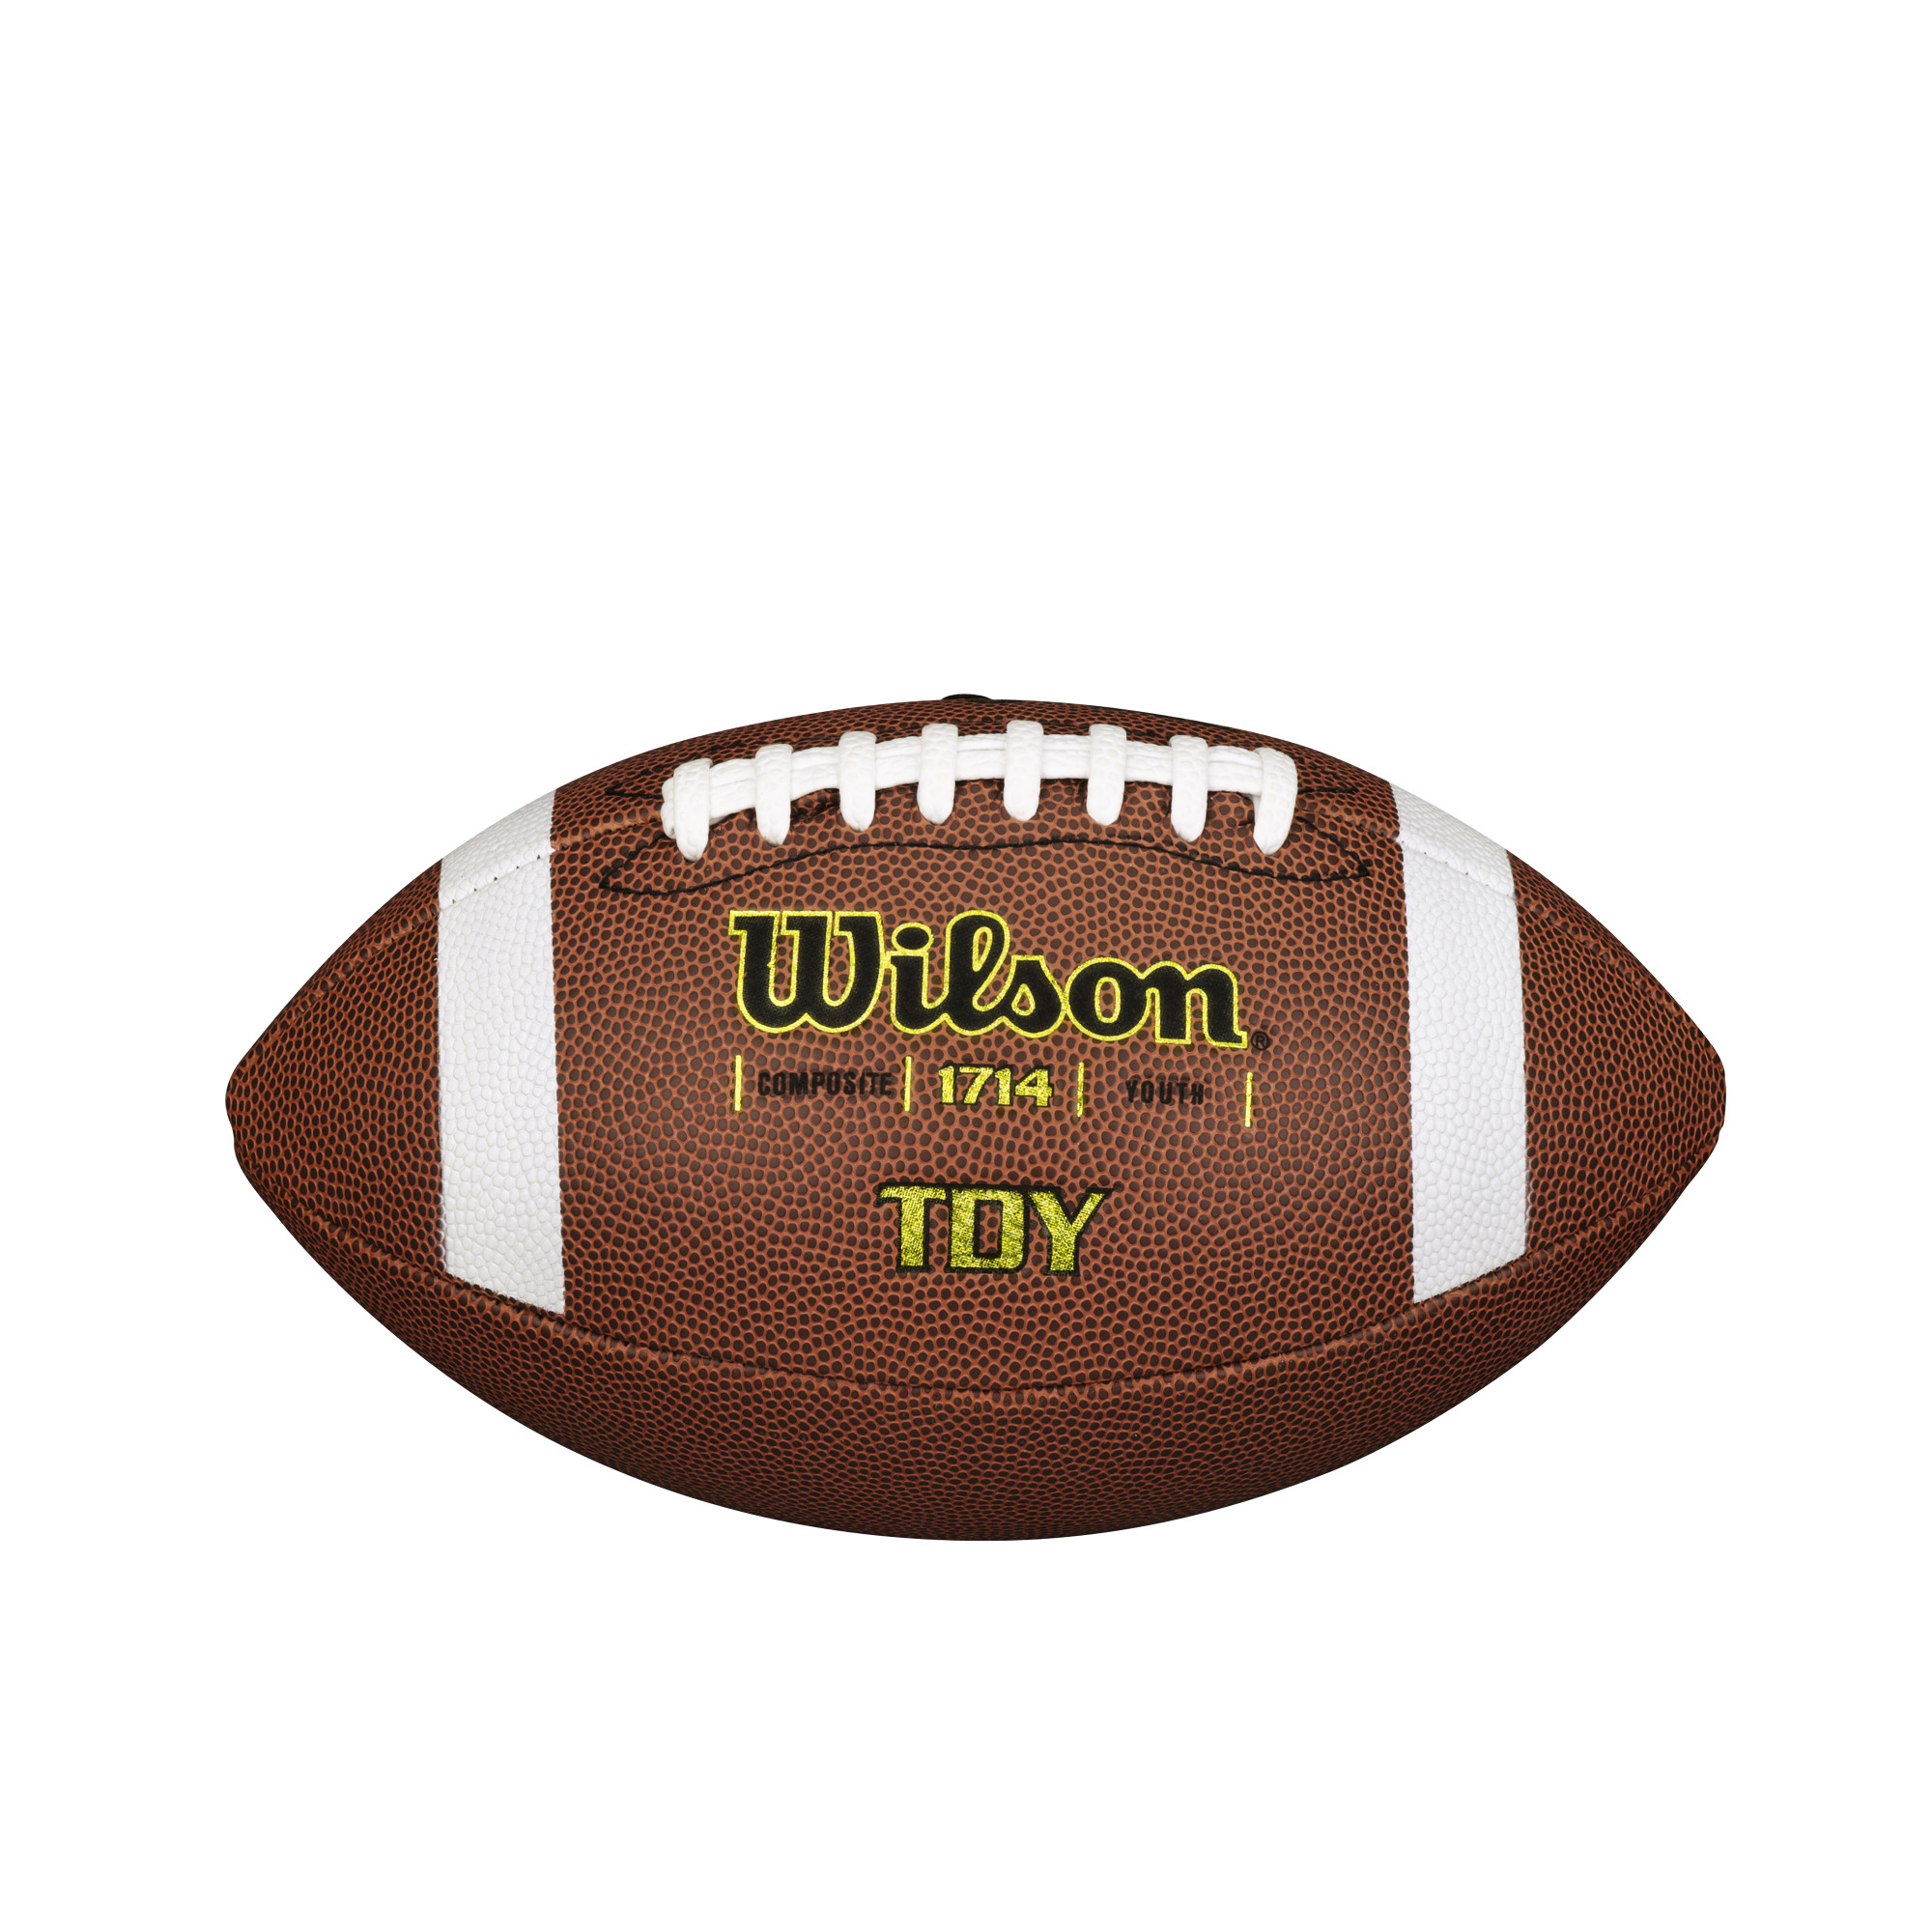 Wilson TDY Composite Football - Youth - image 1 of 5